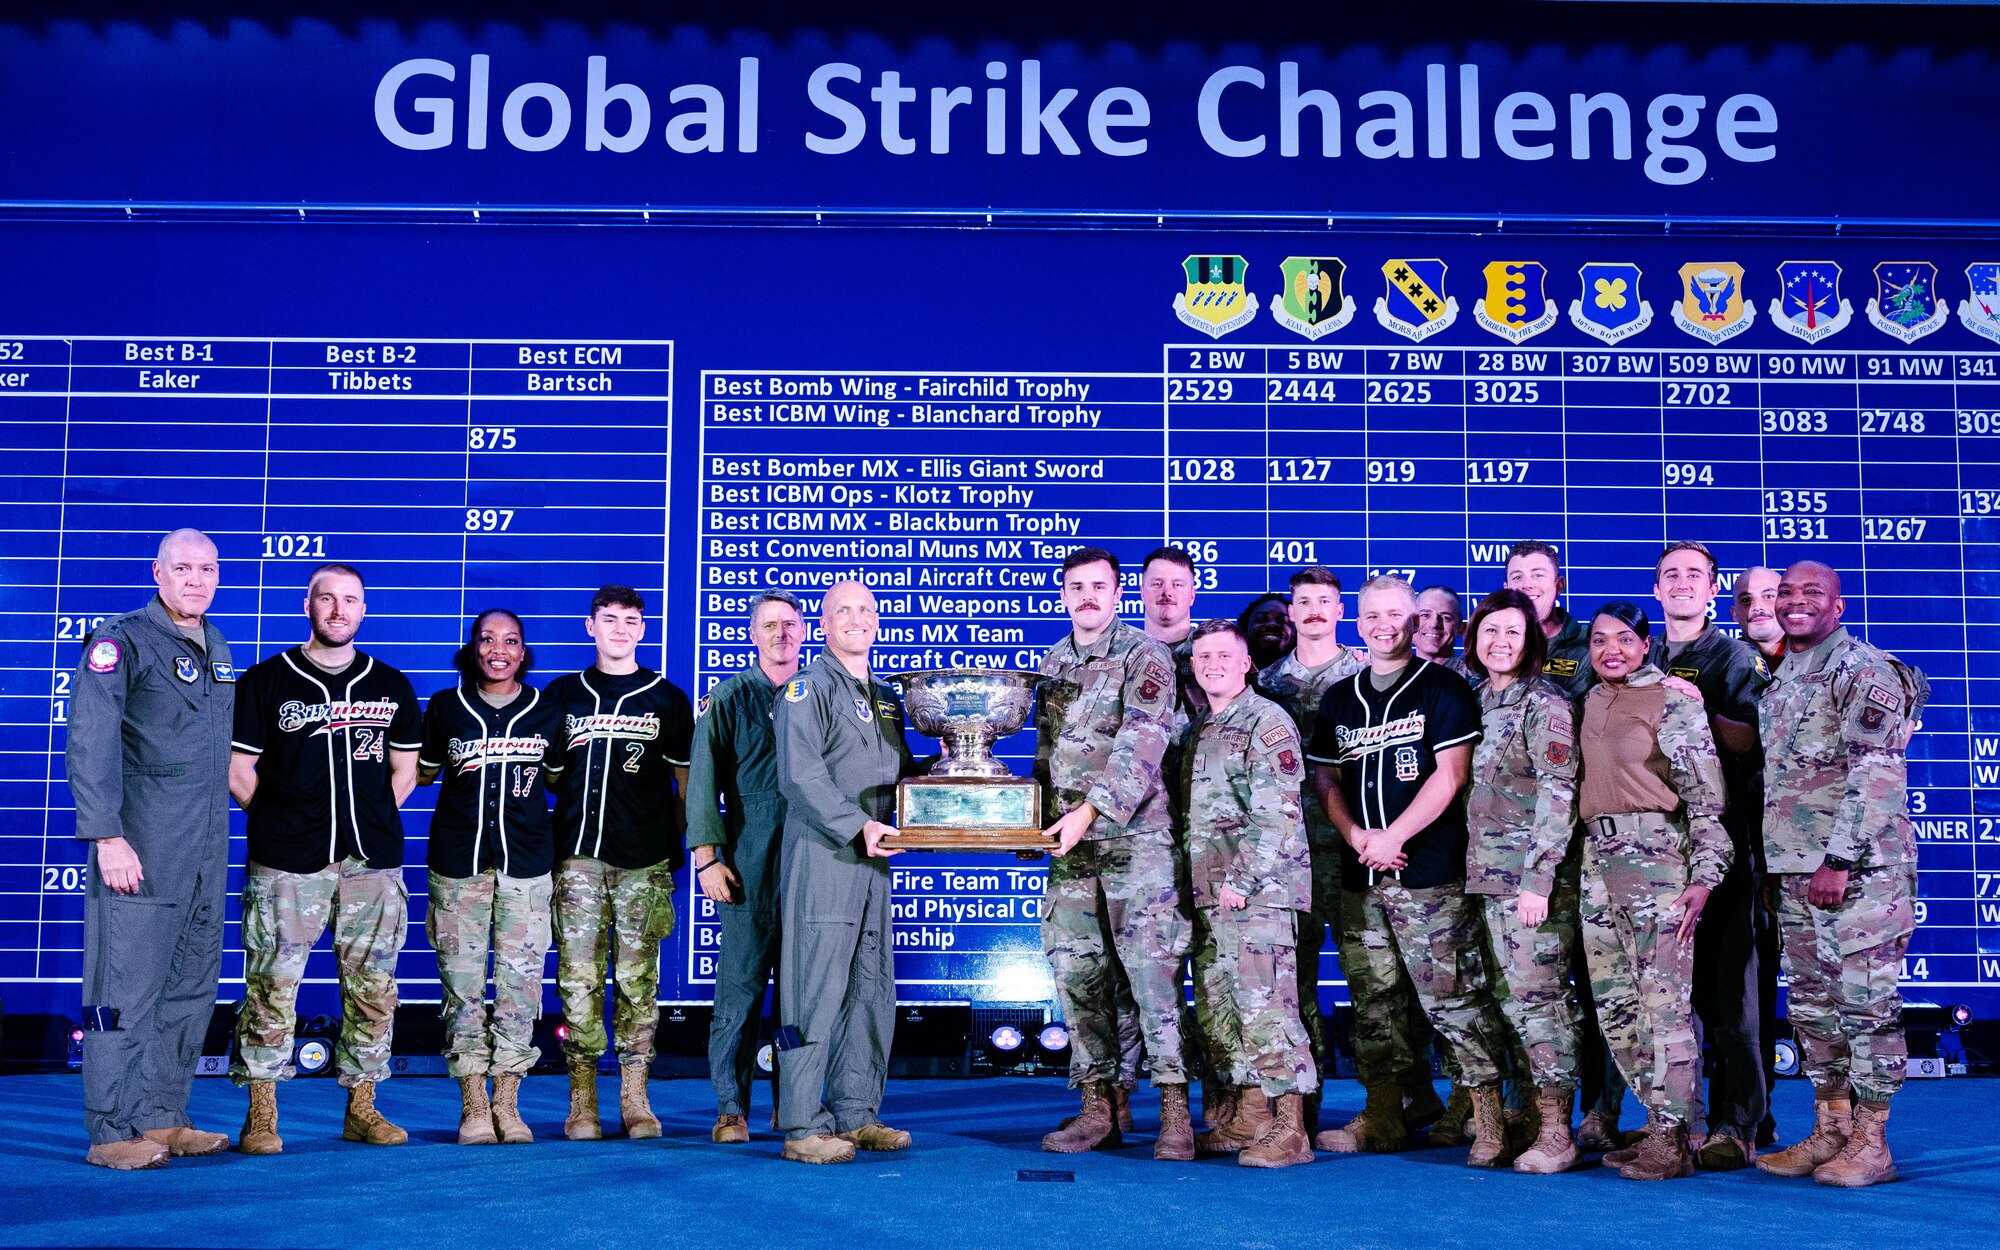 Airmen from the 28th Bomb Wing at Ellsworth Air Force Base, S.D., pose for a photo with the Chief Master Sergeant of the Air Force JoAnne Bass, the Air Force Global Strike Command commander, Gen. Thomas Bussiere and the AFGSC command chief, Chief Master Sgt. Melvina Smith after the 28th BW was awarded the Fairchild trophy at the Global Strike Challenge scoring ceremony on November 8, 2023 at Barksdale Air Force Base, La. The Fairchild trophy was awarded to the 28th BW for earning the highest combined score in operations, security forces and maintenance. (U.S. Air Force photo by Senior Airman William Pugh)